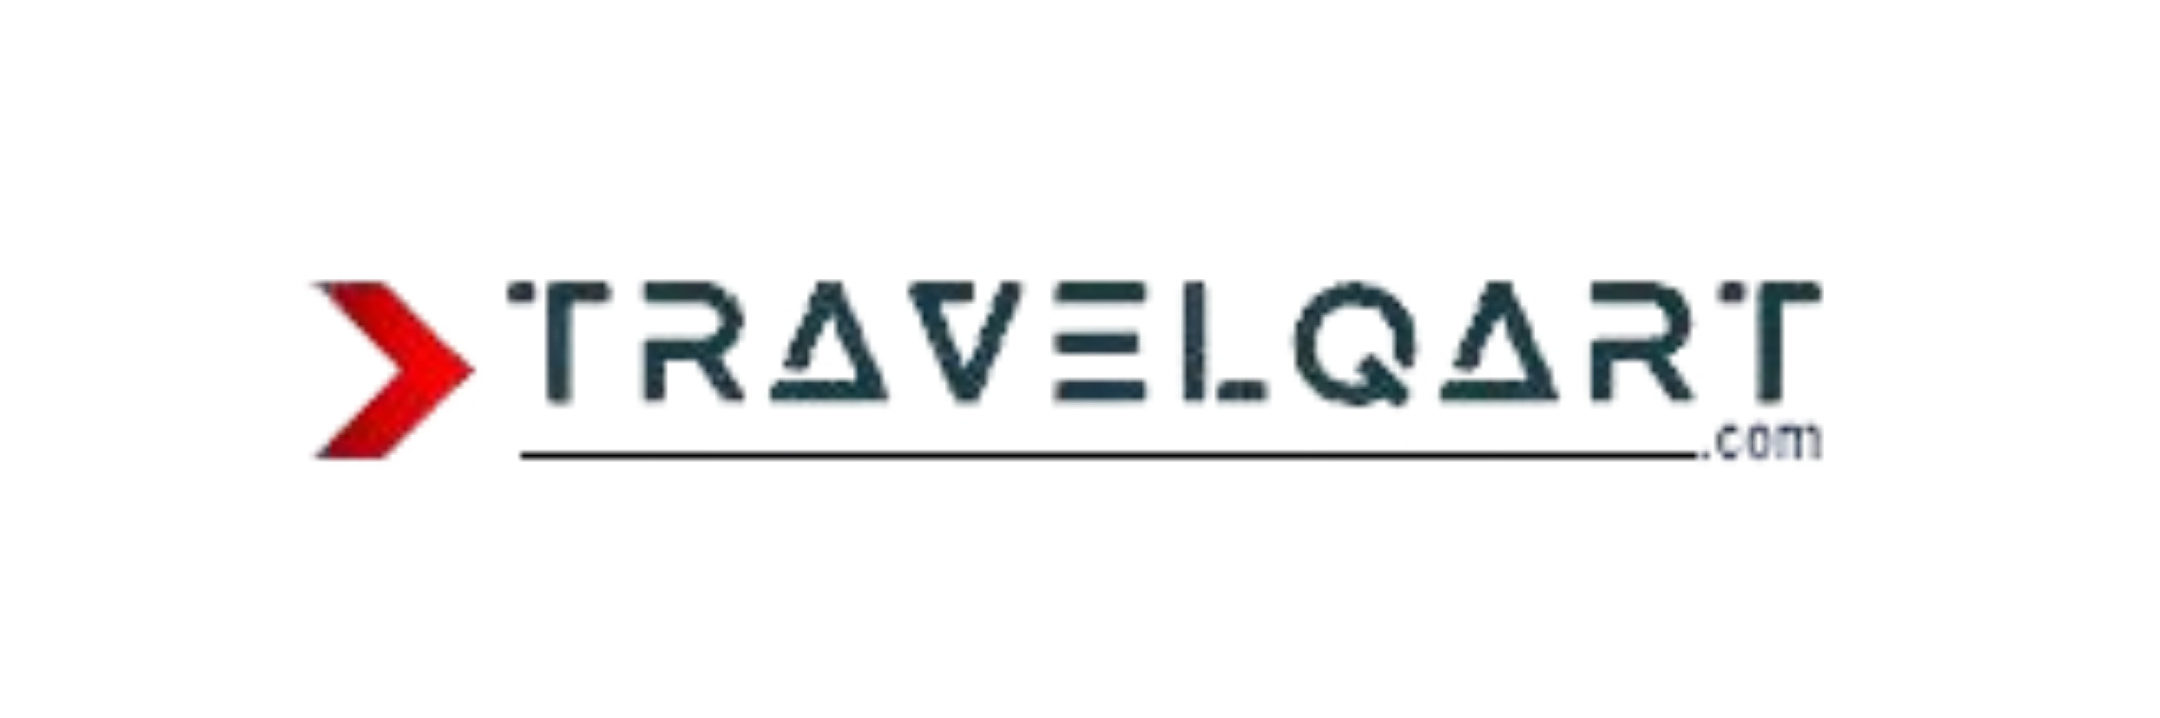 Cheap Airlines Reservation with Travelqart